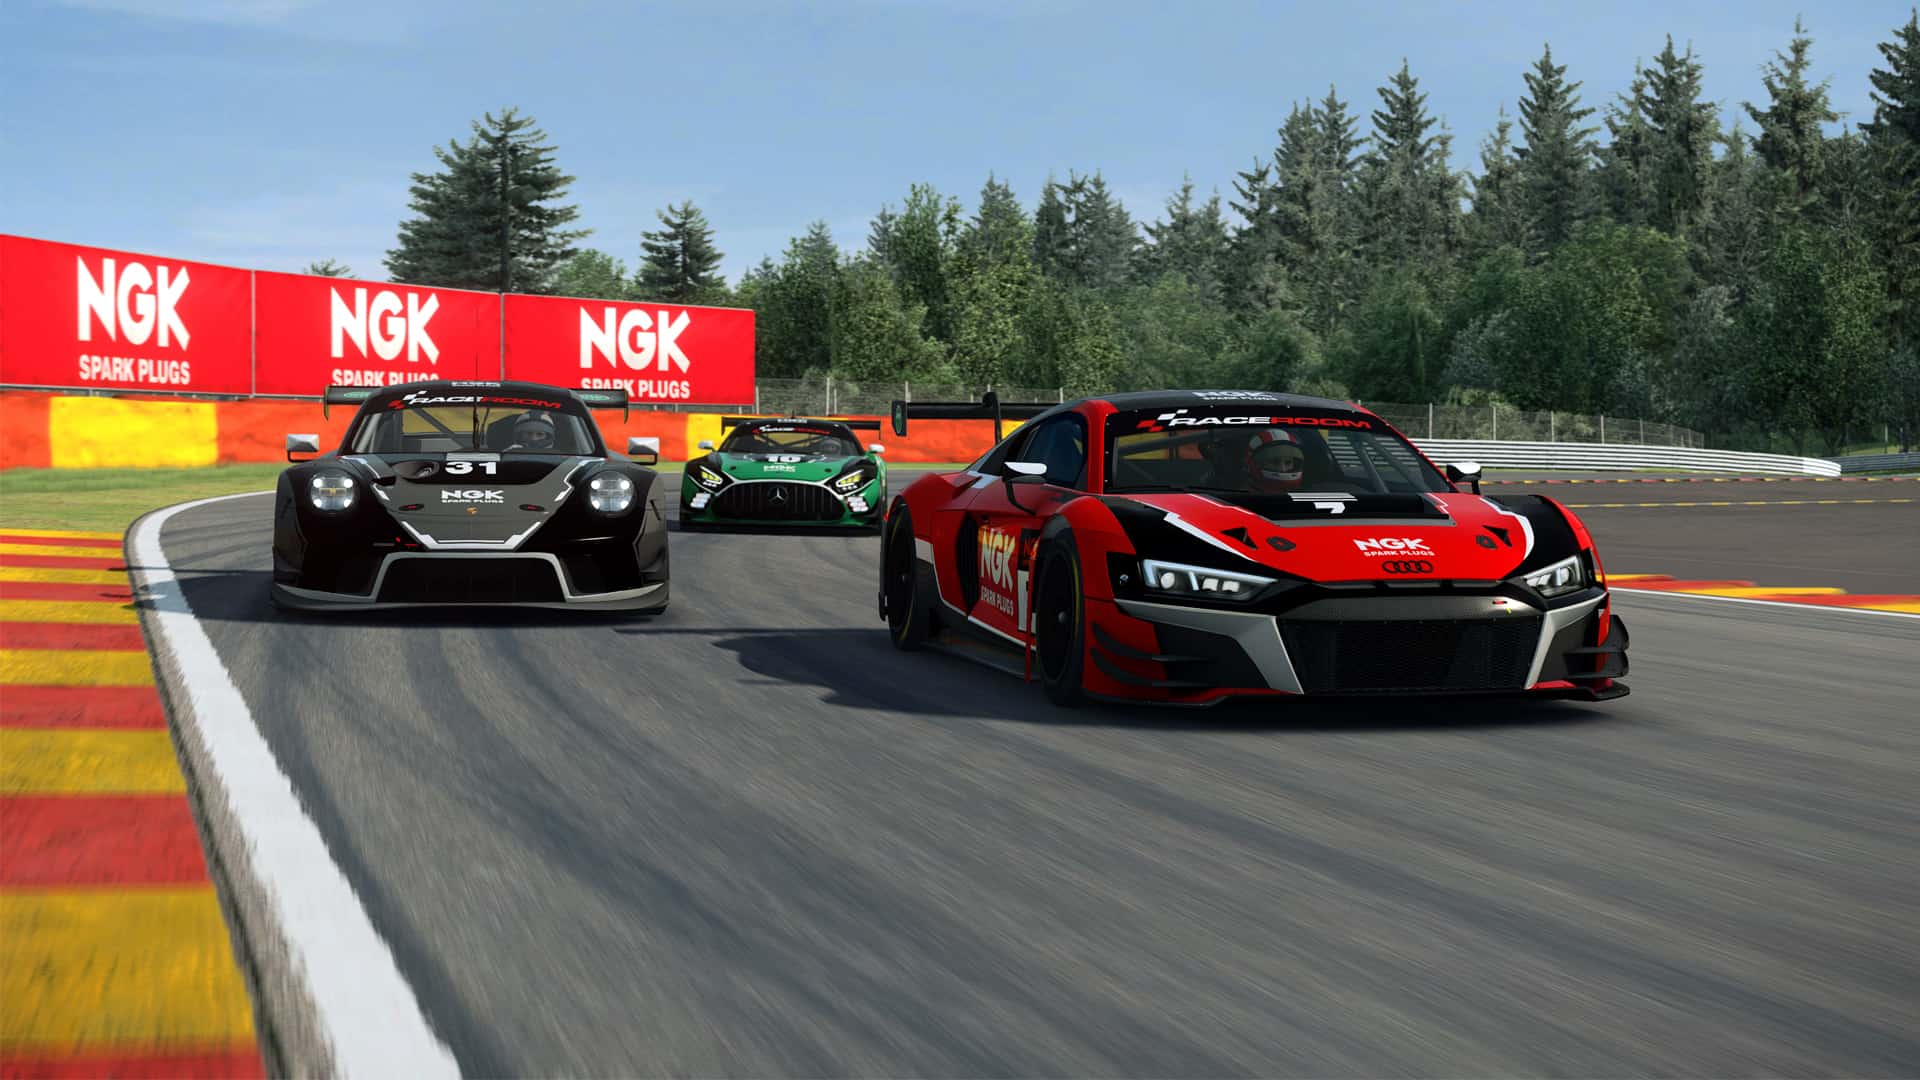 NGK SPARK PLUG Esports Cup returns, LIVE on Traxion